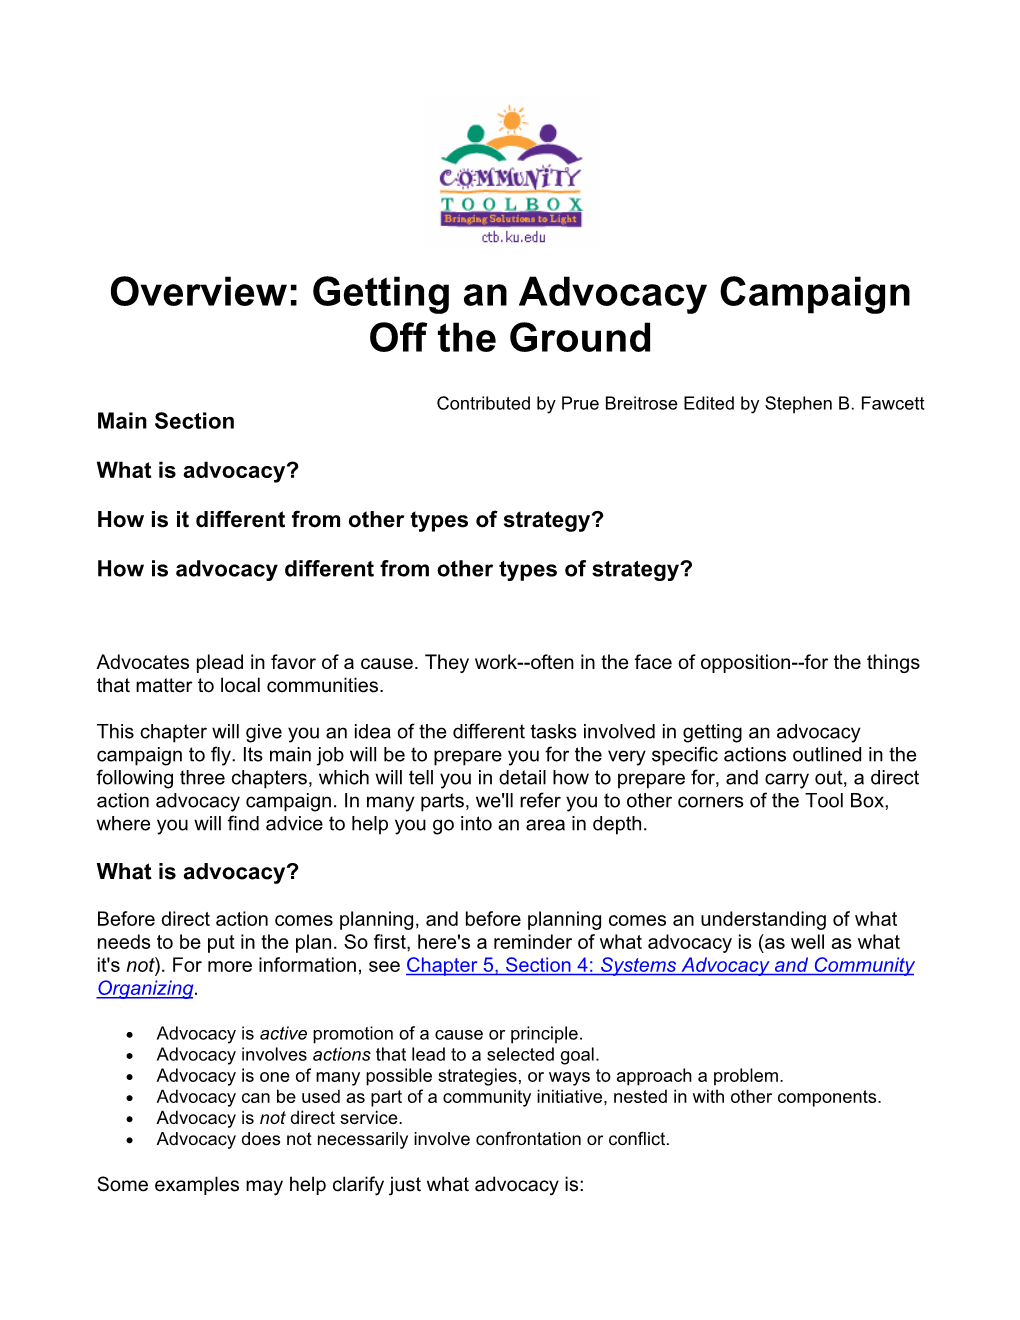 Getting an Advocacy Campaign Off the Ground